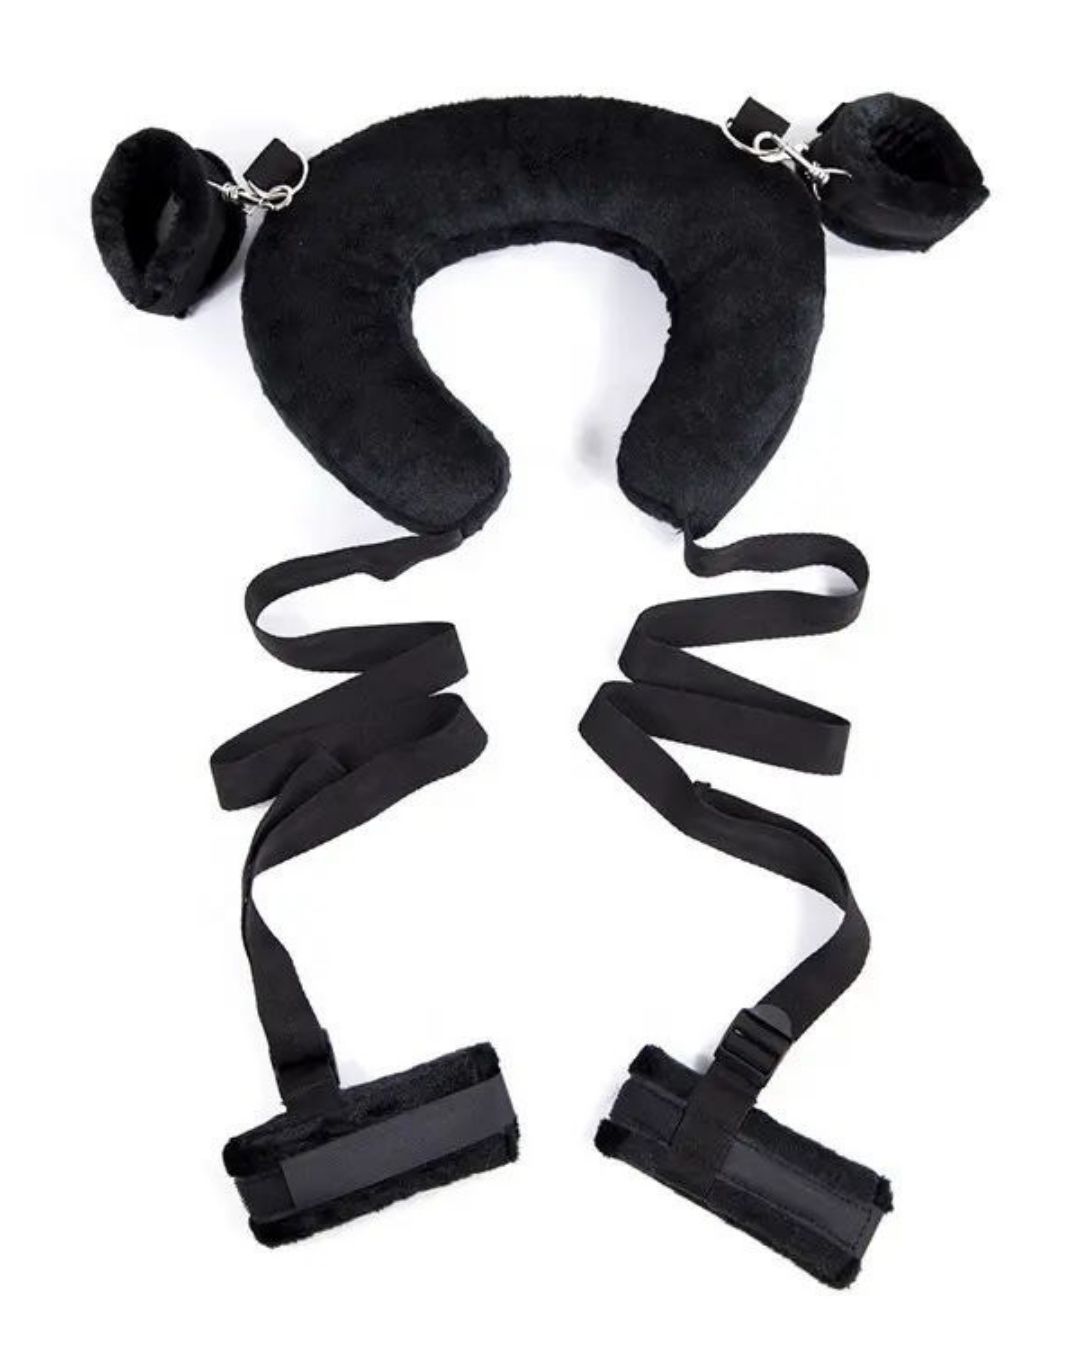 Straps Handcuffs Set with Soft Furry Comfortable Wrist and Ankle Cuffs